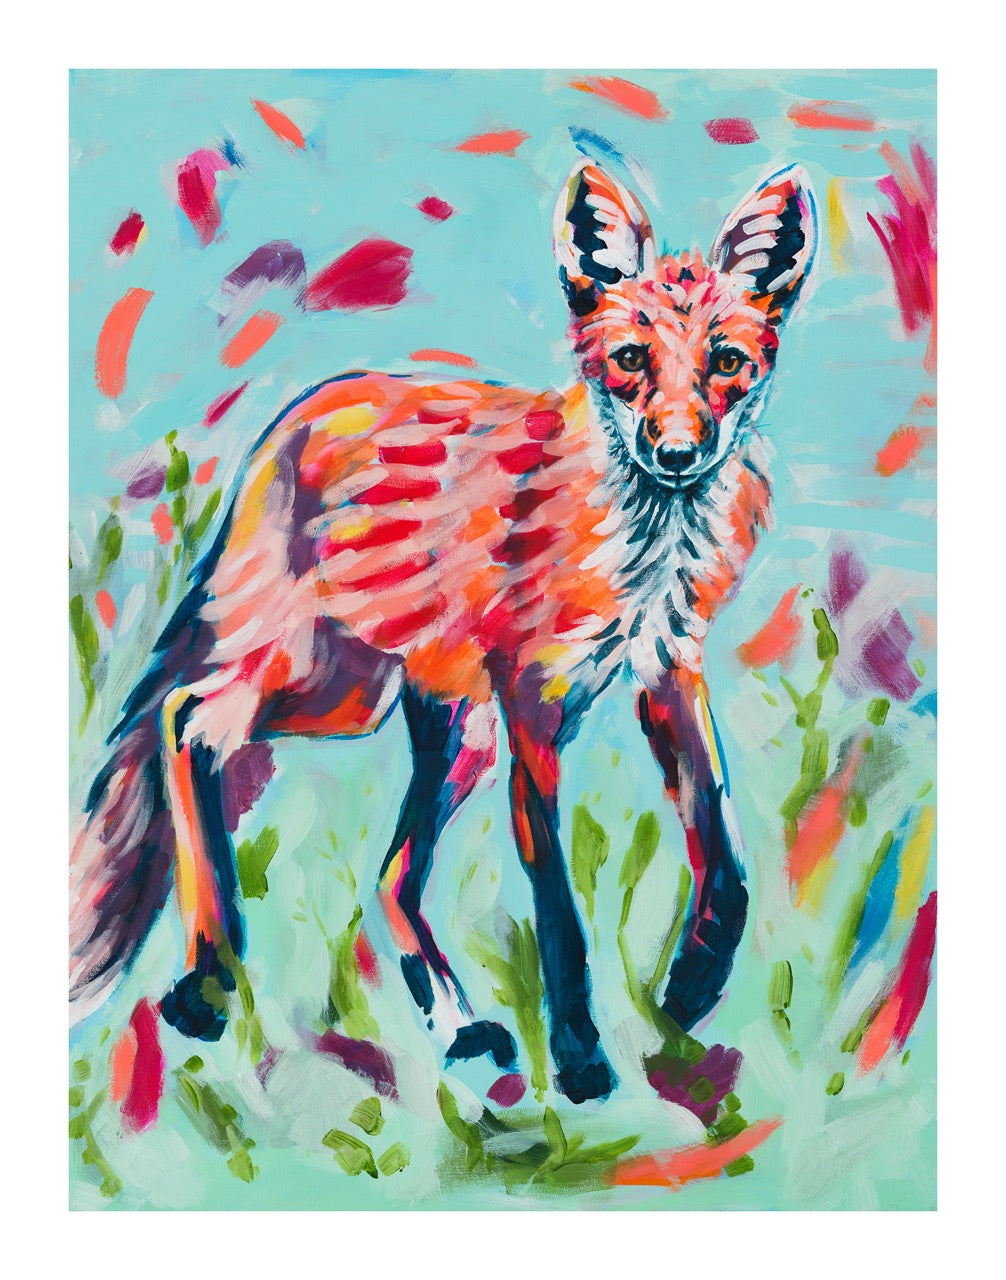 REPRODUCTION OF "FOX" PAINTING